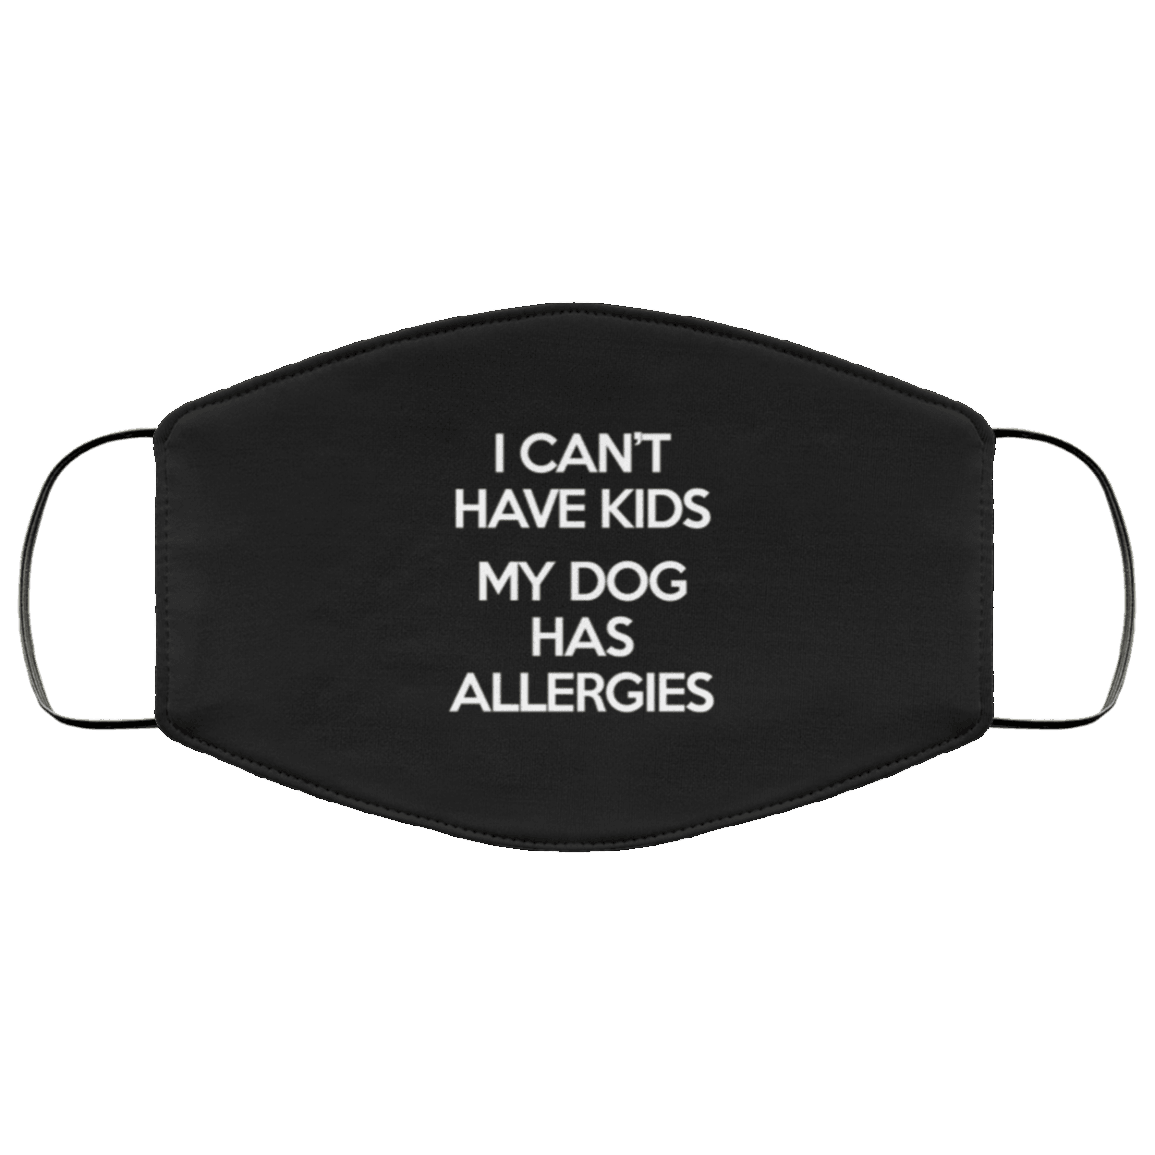 Designs by MyUtopia Shout Out:I Can't Have Kids My Dog Has Allergies Humor Adult Fabric Face Mask with Elastic Ear Loops,3 Layer Fabric Face Mask / Black / Adult,Fabric Face Mask